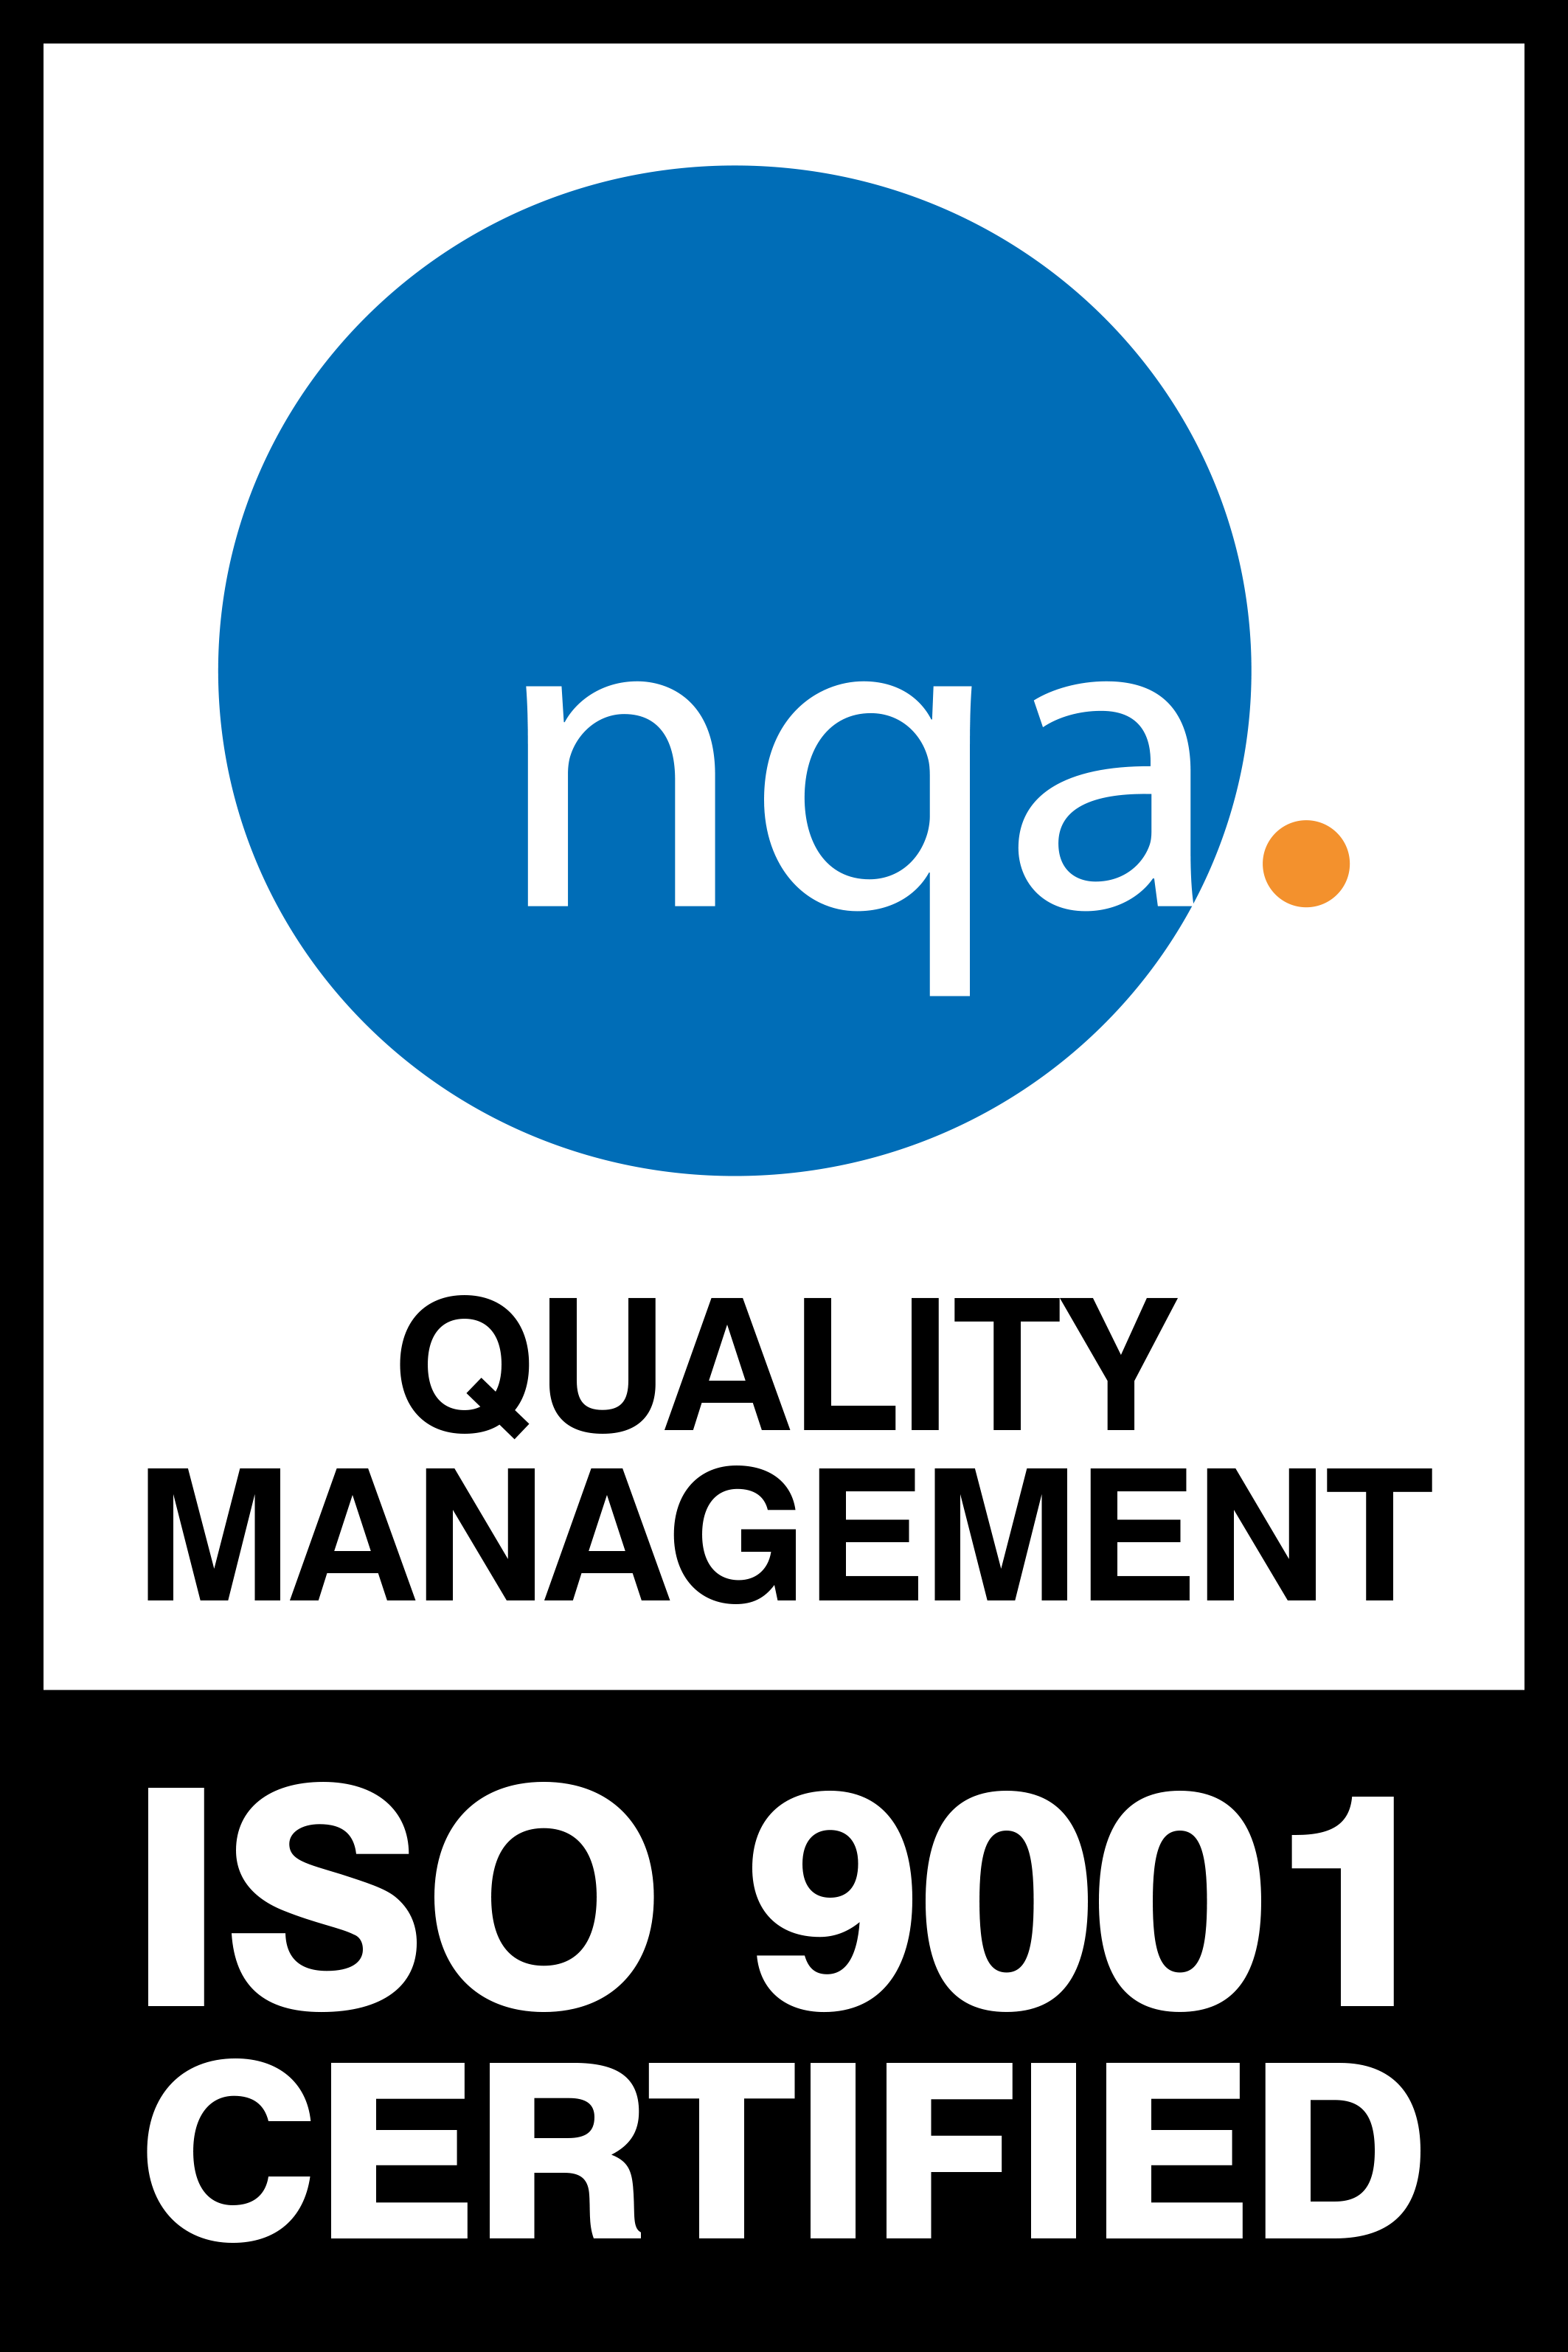 NQA-Certification-Vehicle-Stickers-180x270mm-ISO-9001